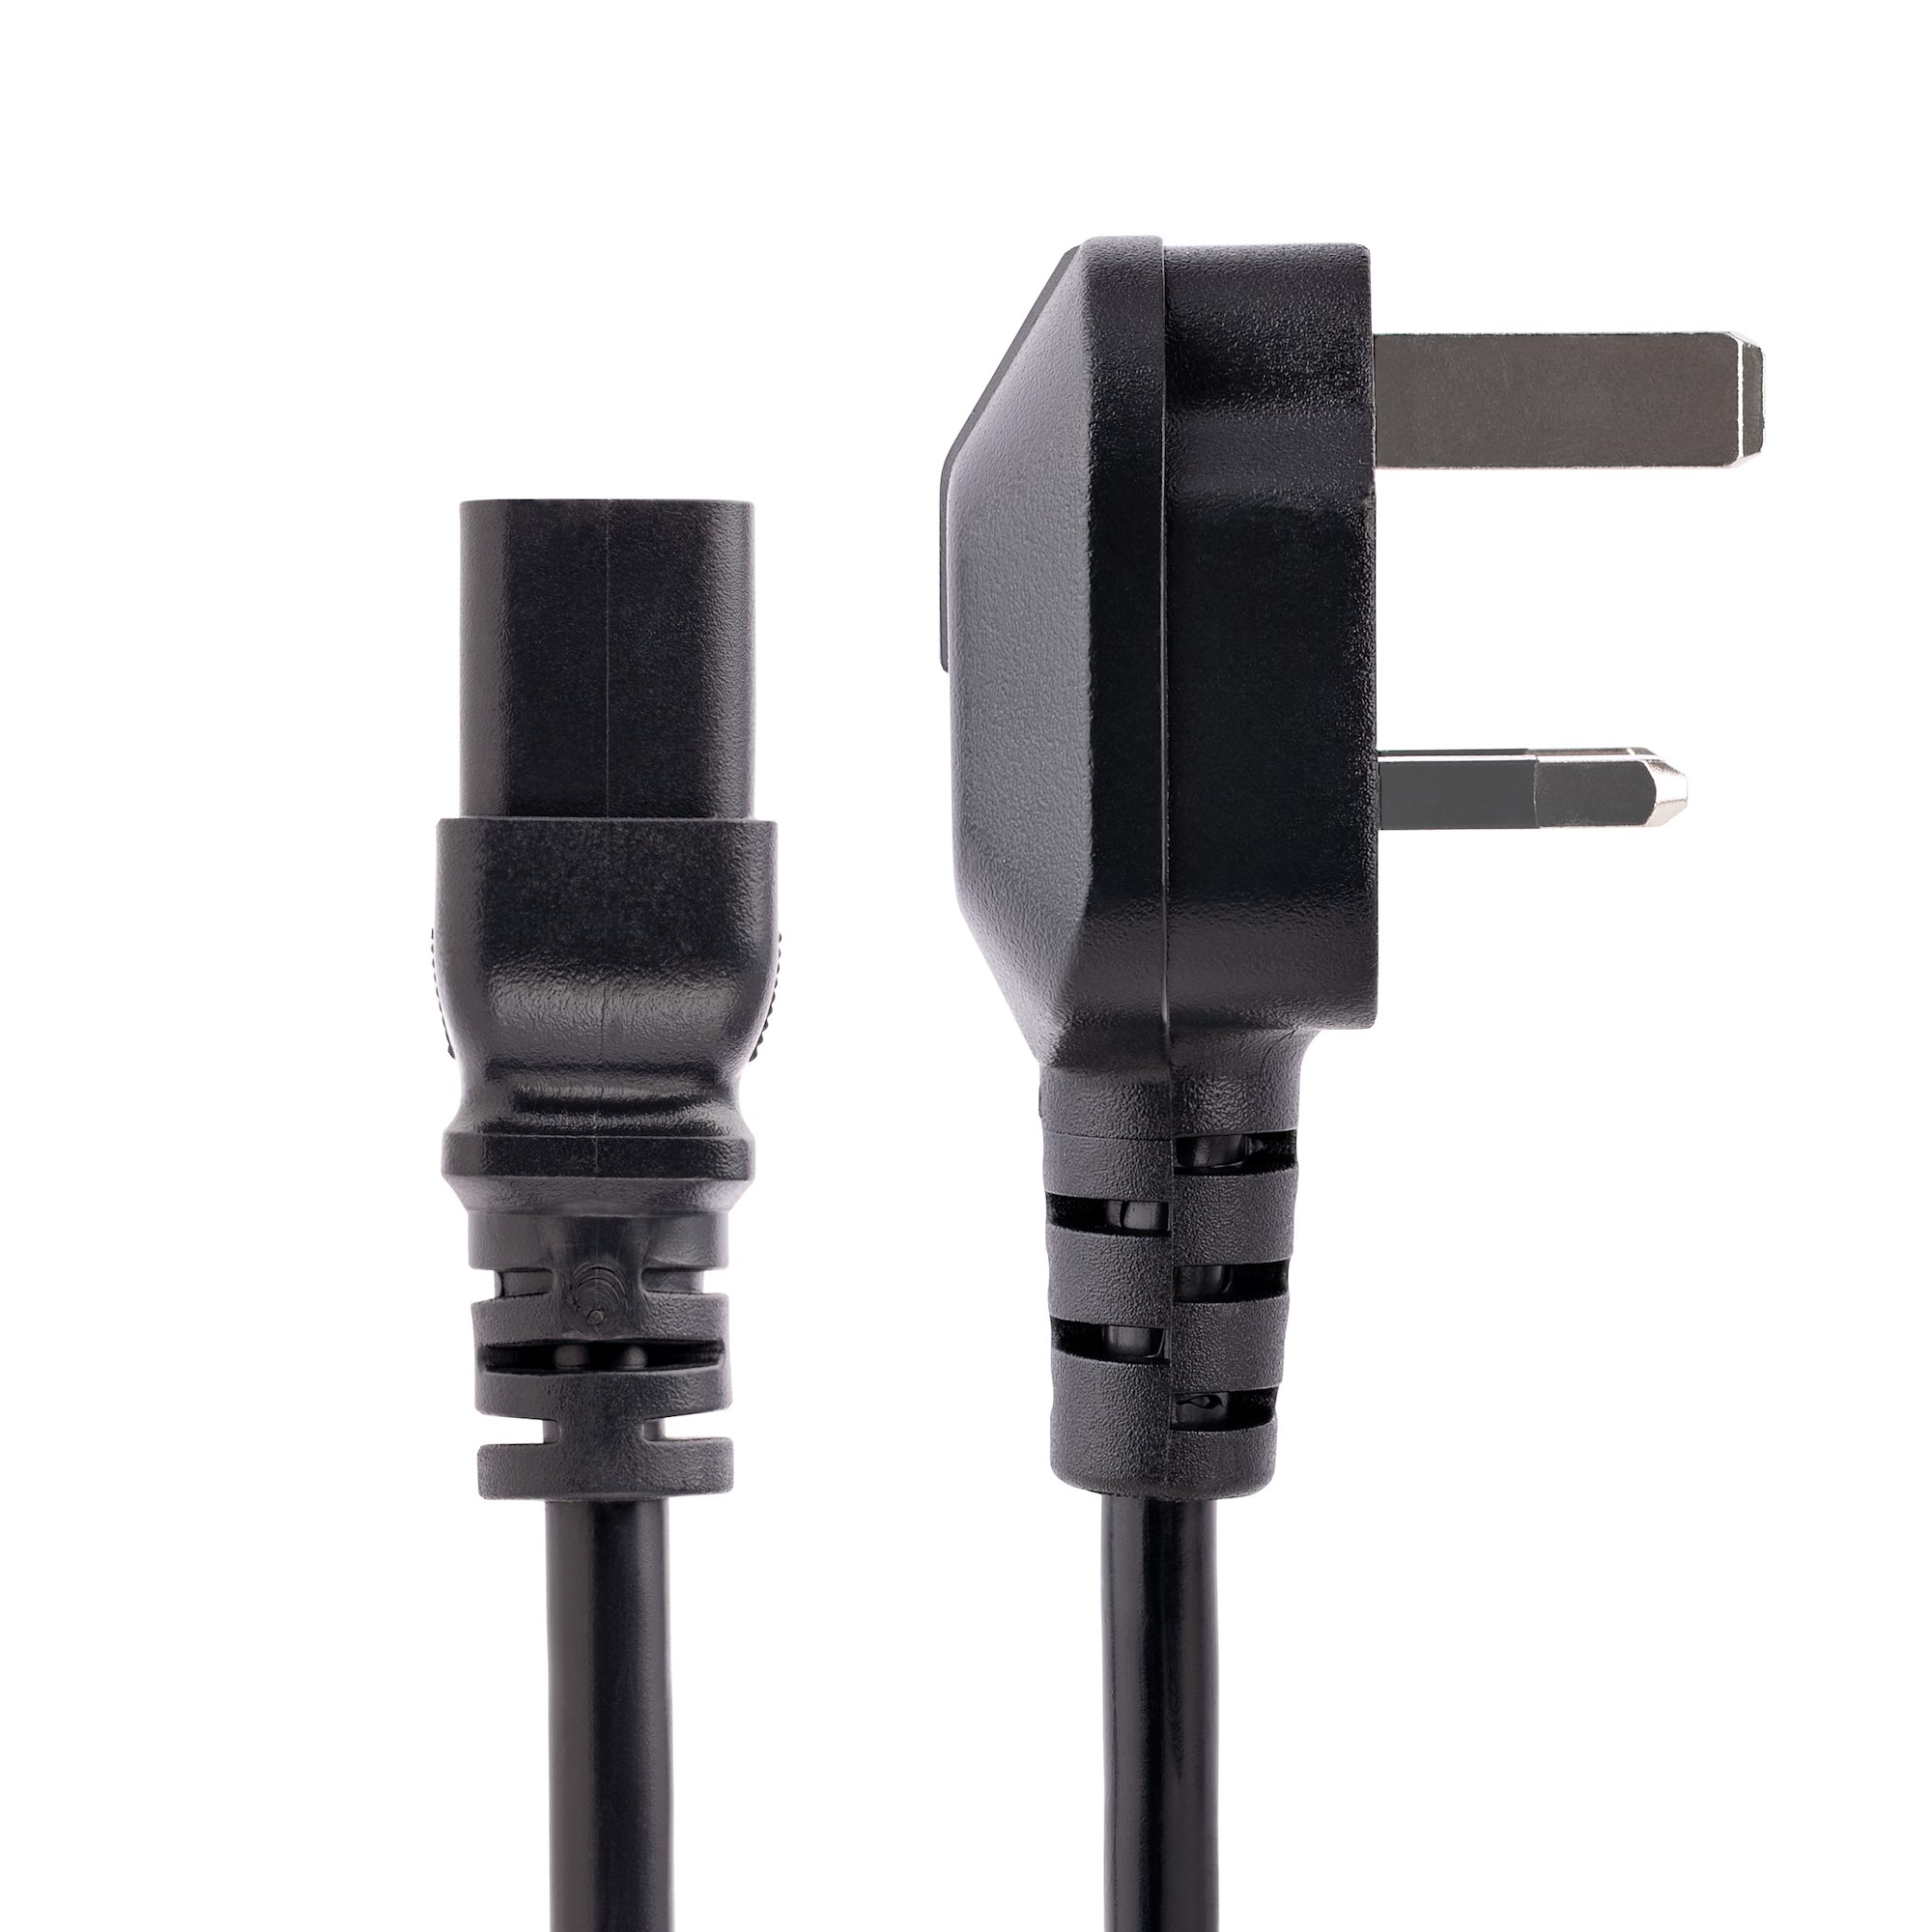 6ft (2m) Power Cable, BS 1363 to C19 - Computer Power Cables - External, Cables